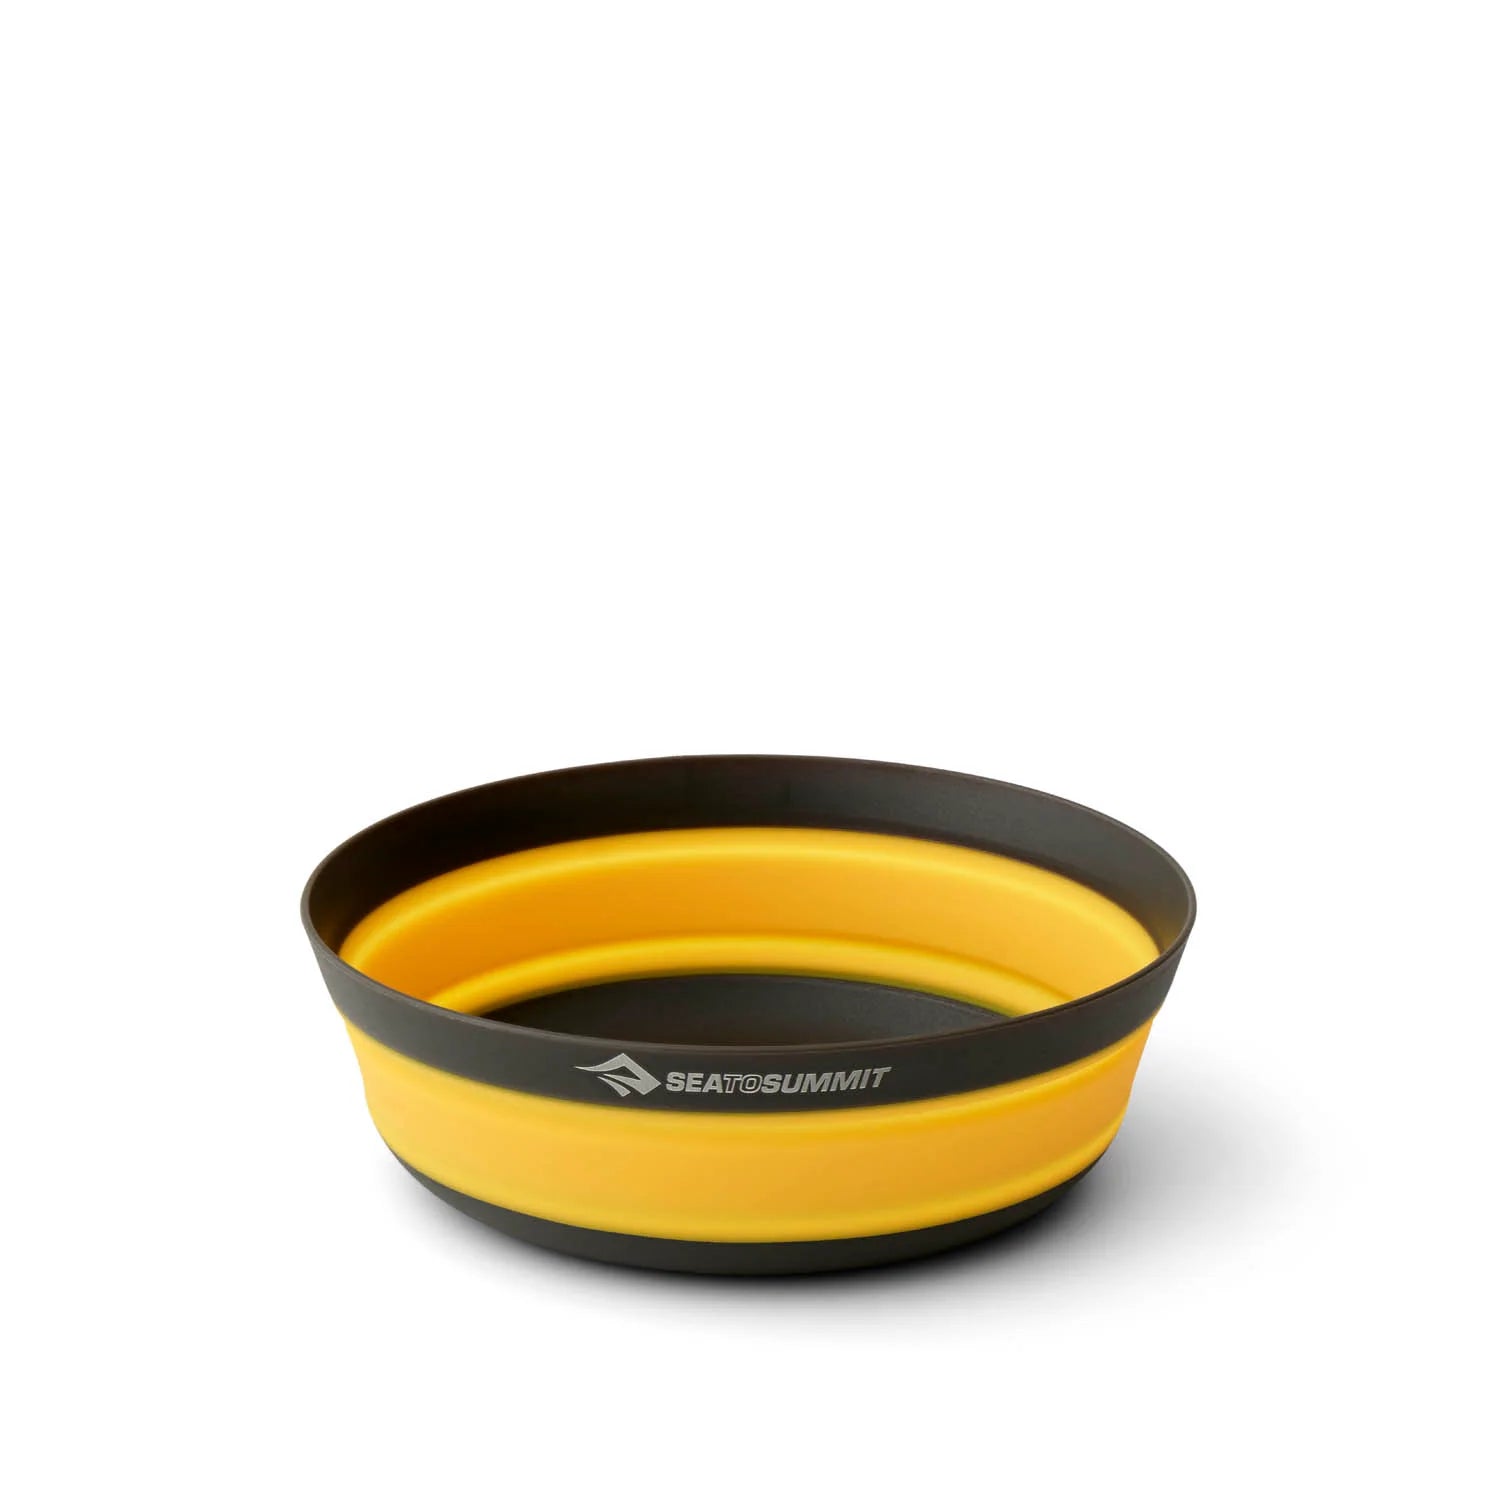 Sea to Summit Frontier UL Collapsible Bowl - Large - YELLOW - Mansfield Hunting & Fishing - Products to prepare for Corona Virus